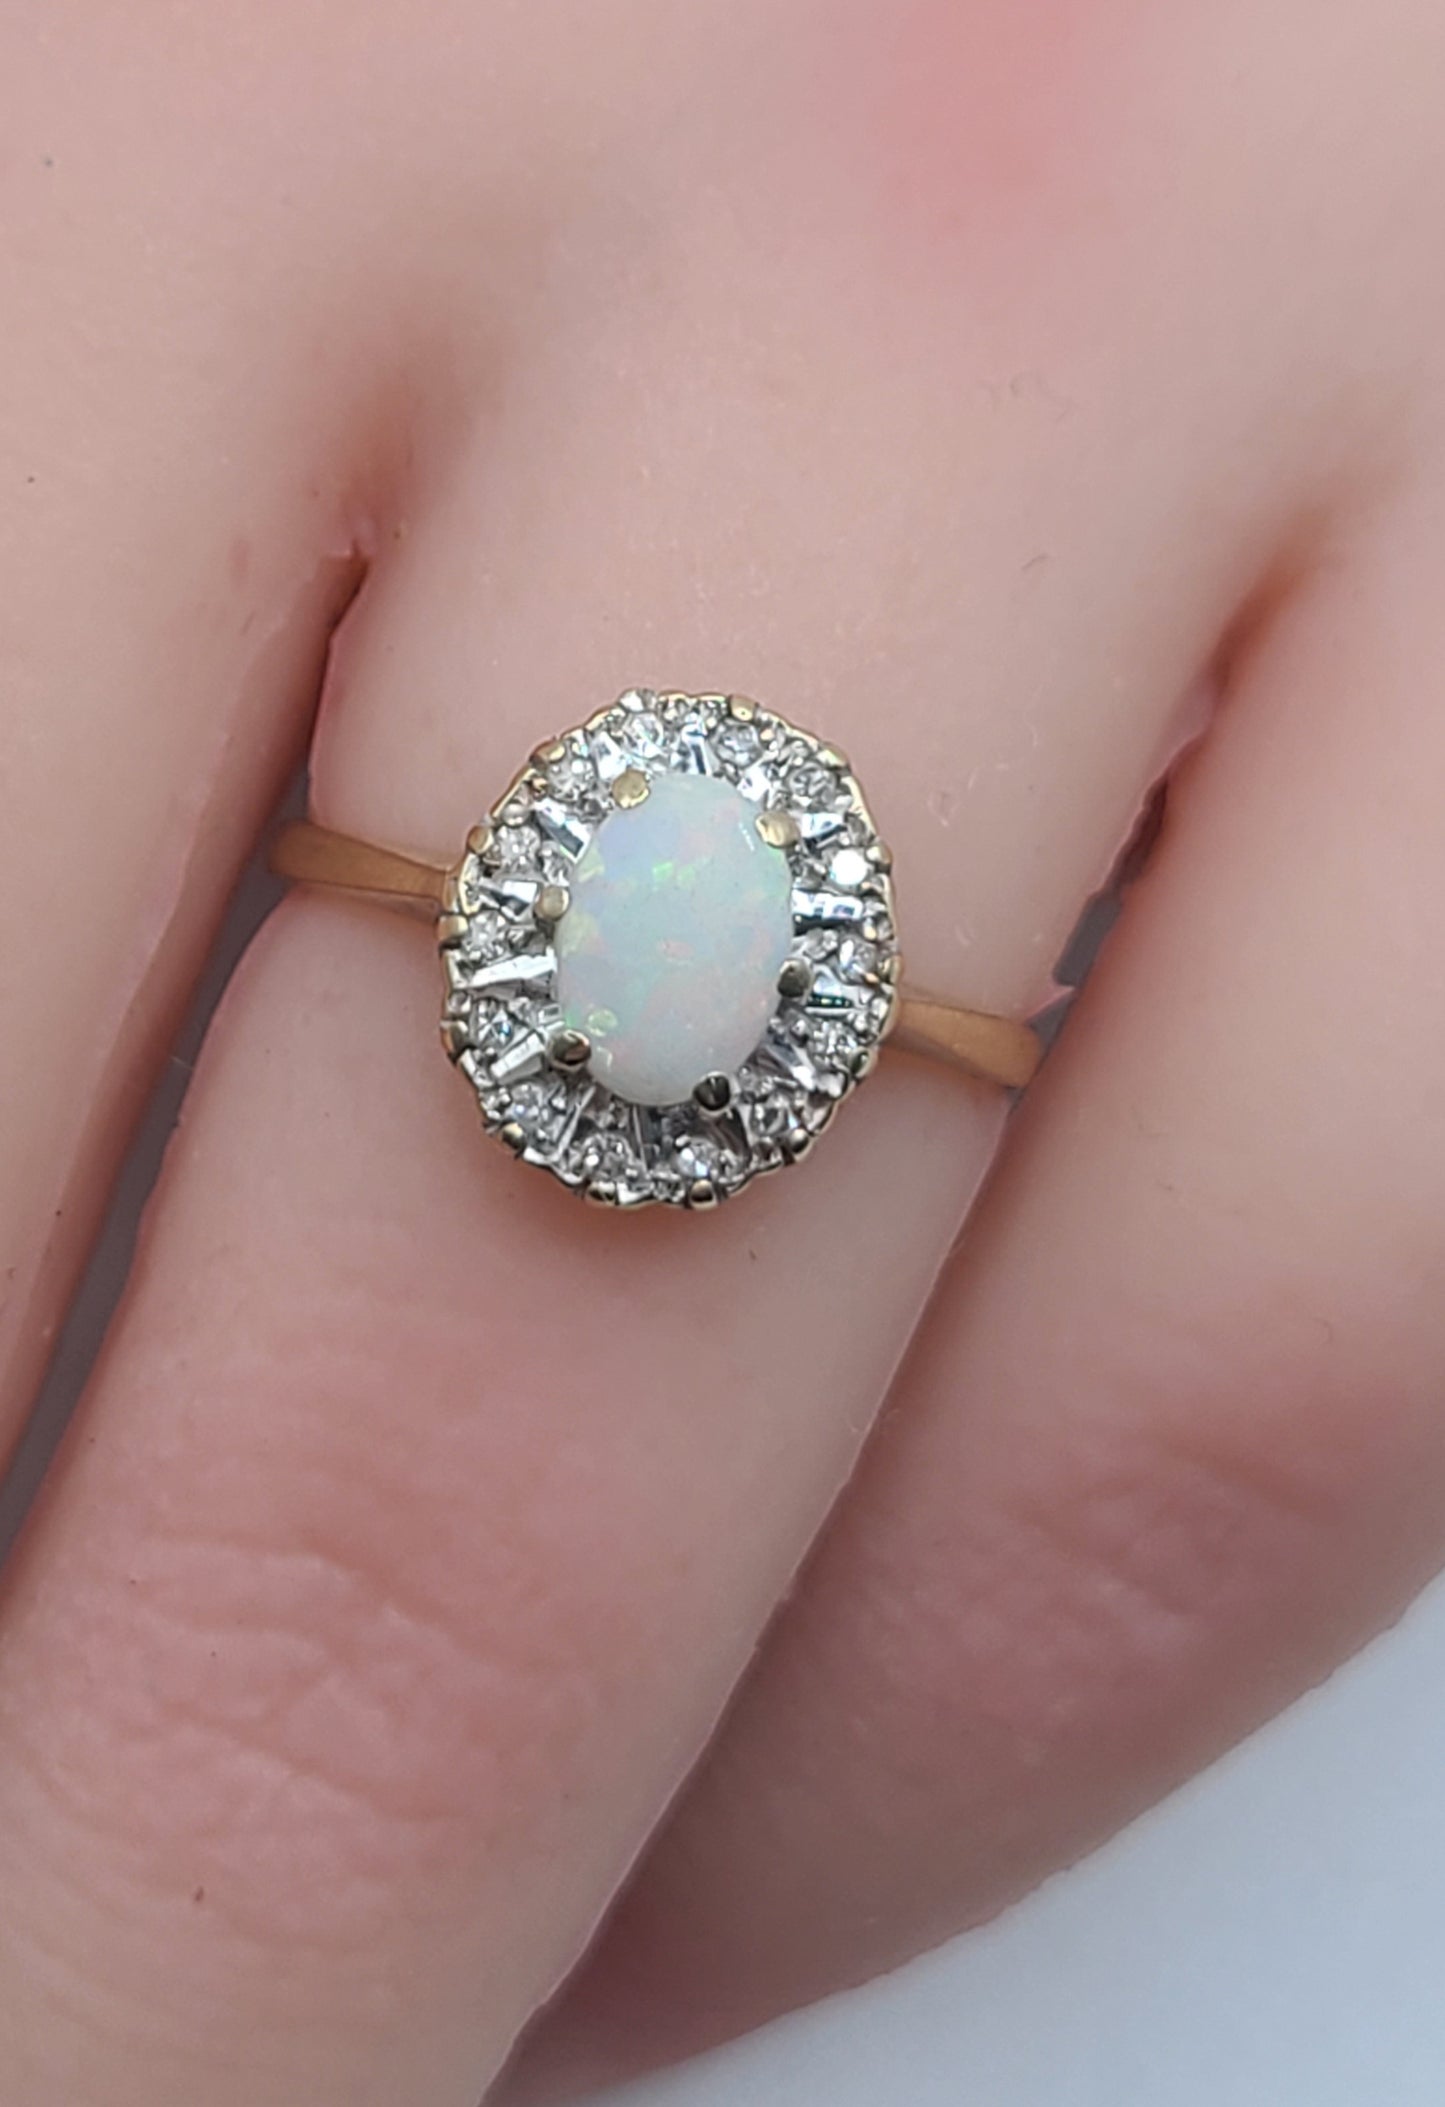 9ct Gold Oval Cut Opal &CZ Halo Ring Size N1/2